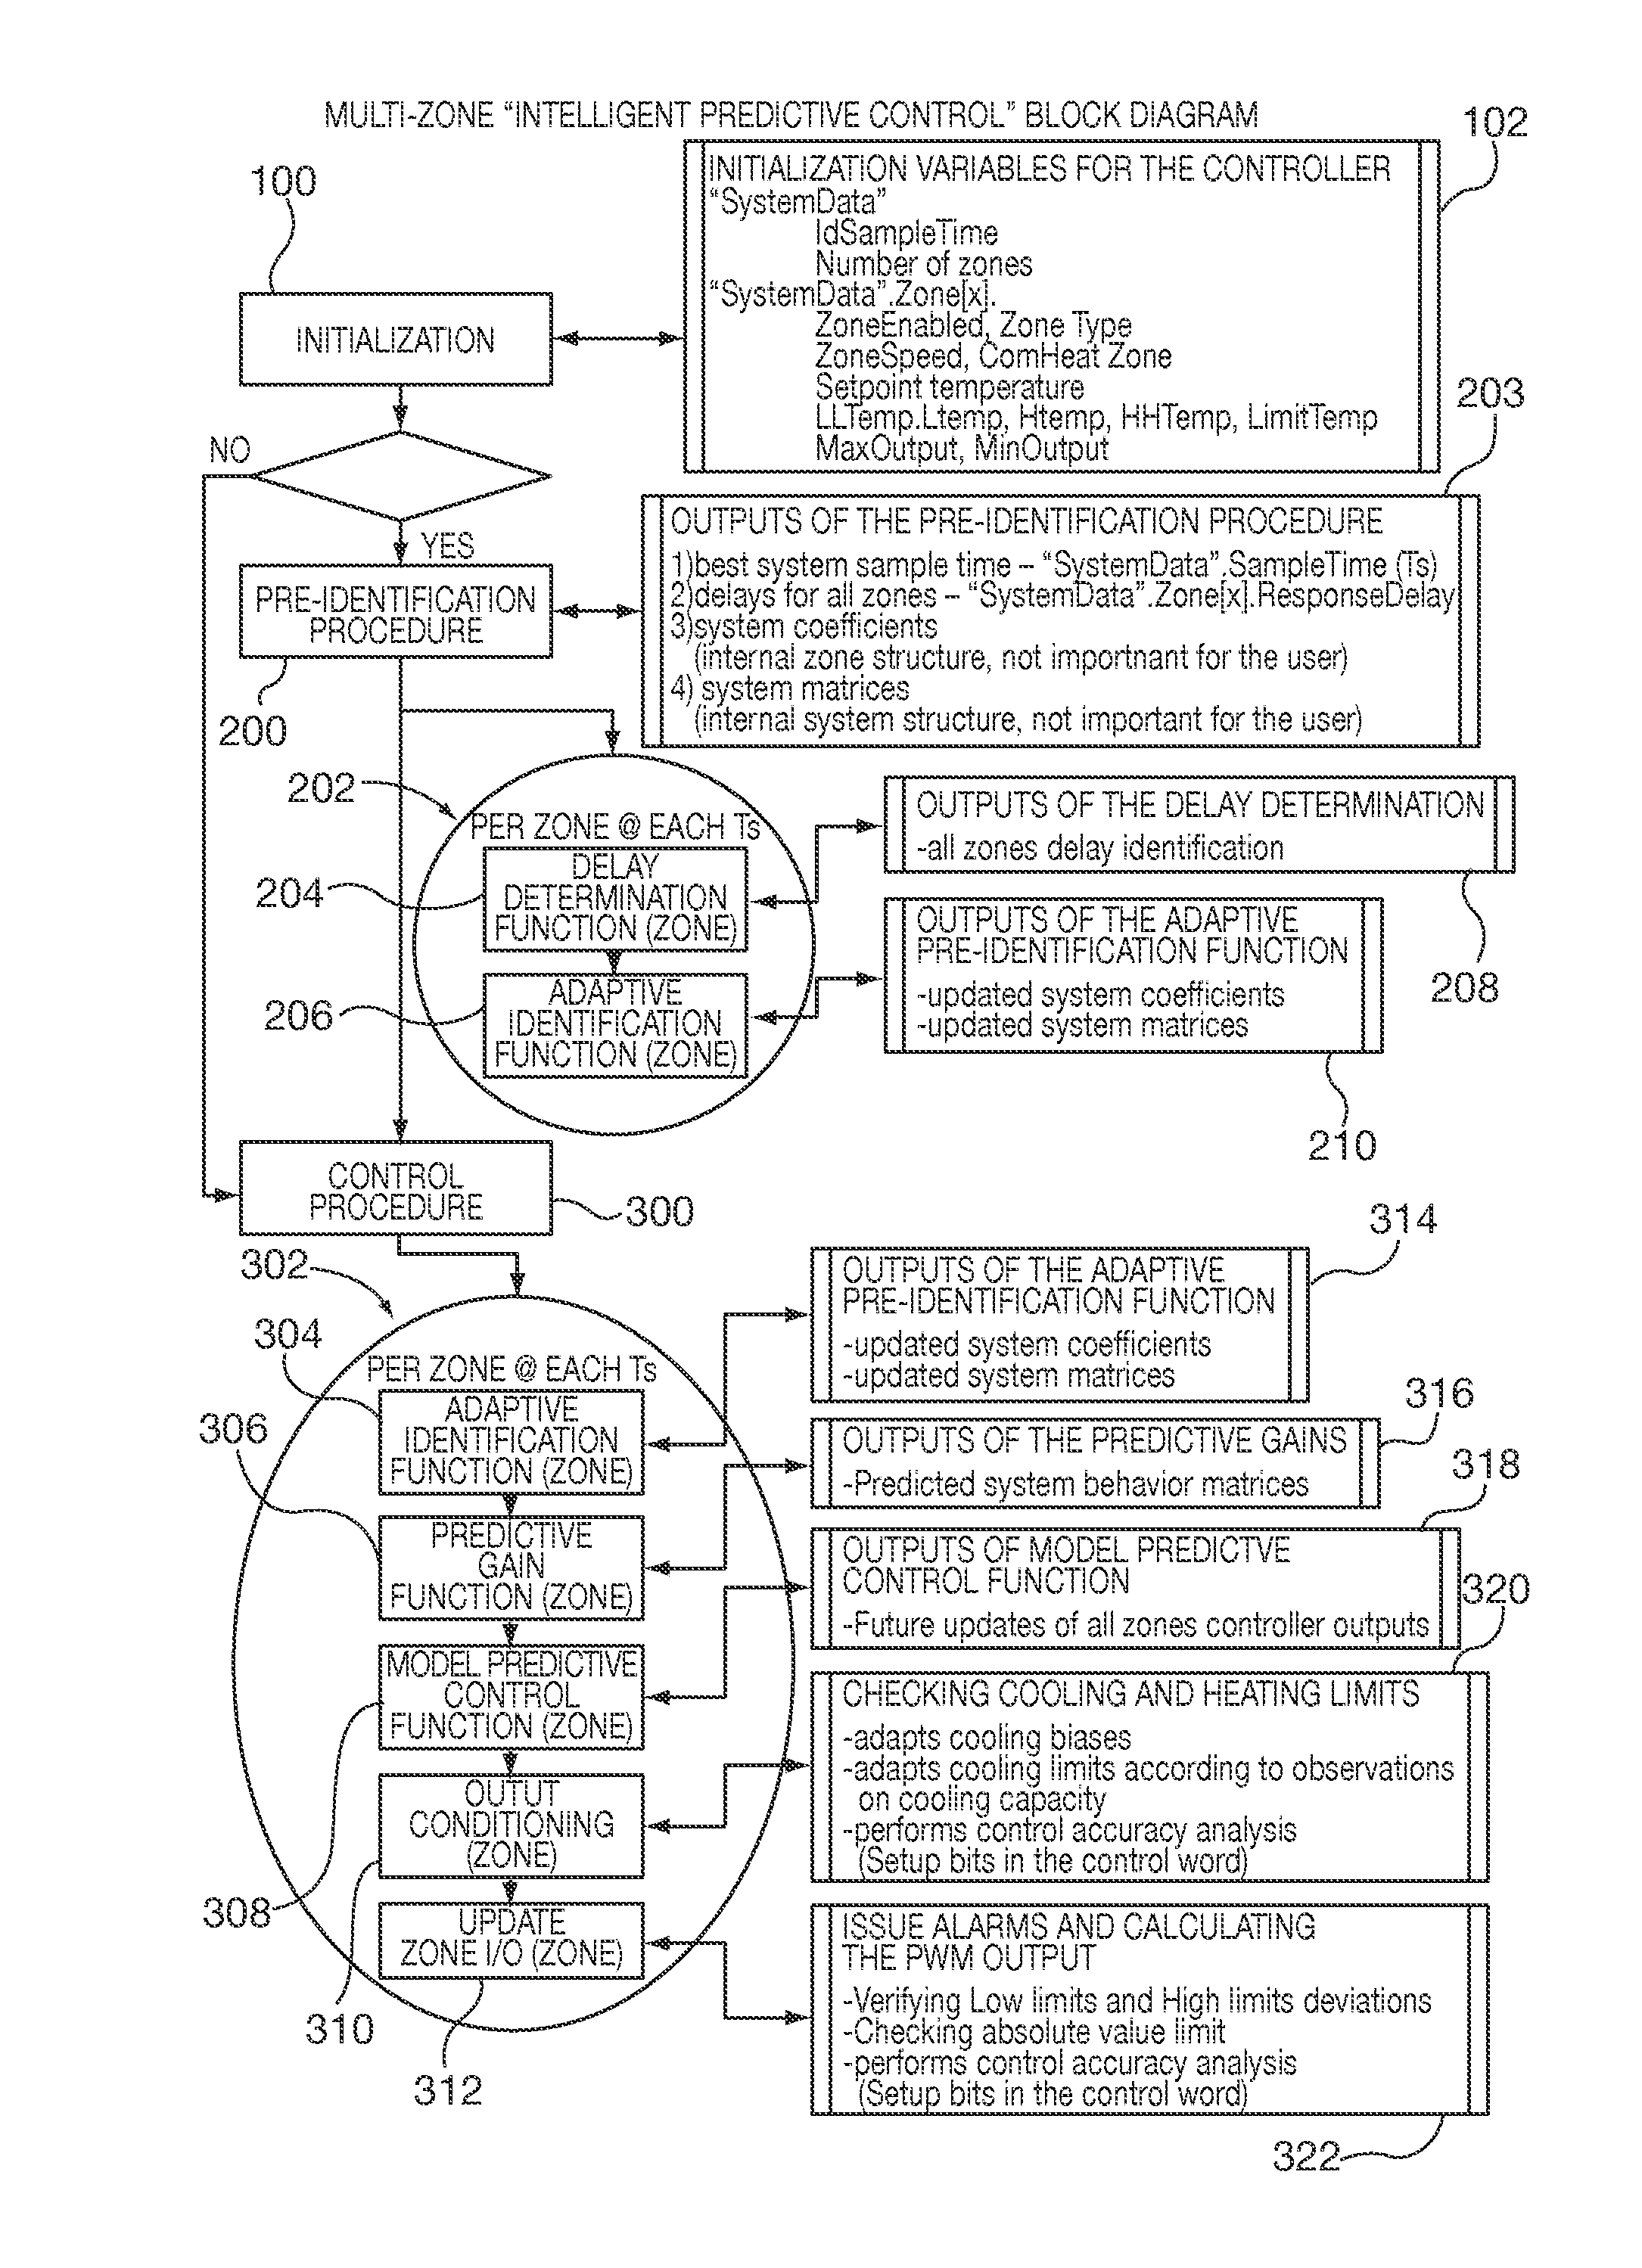 Method and apparatus of a self-configured, model-based adaptive, predictive controller for multi-zone regulation systems